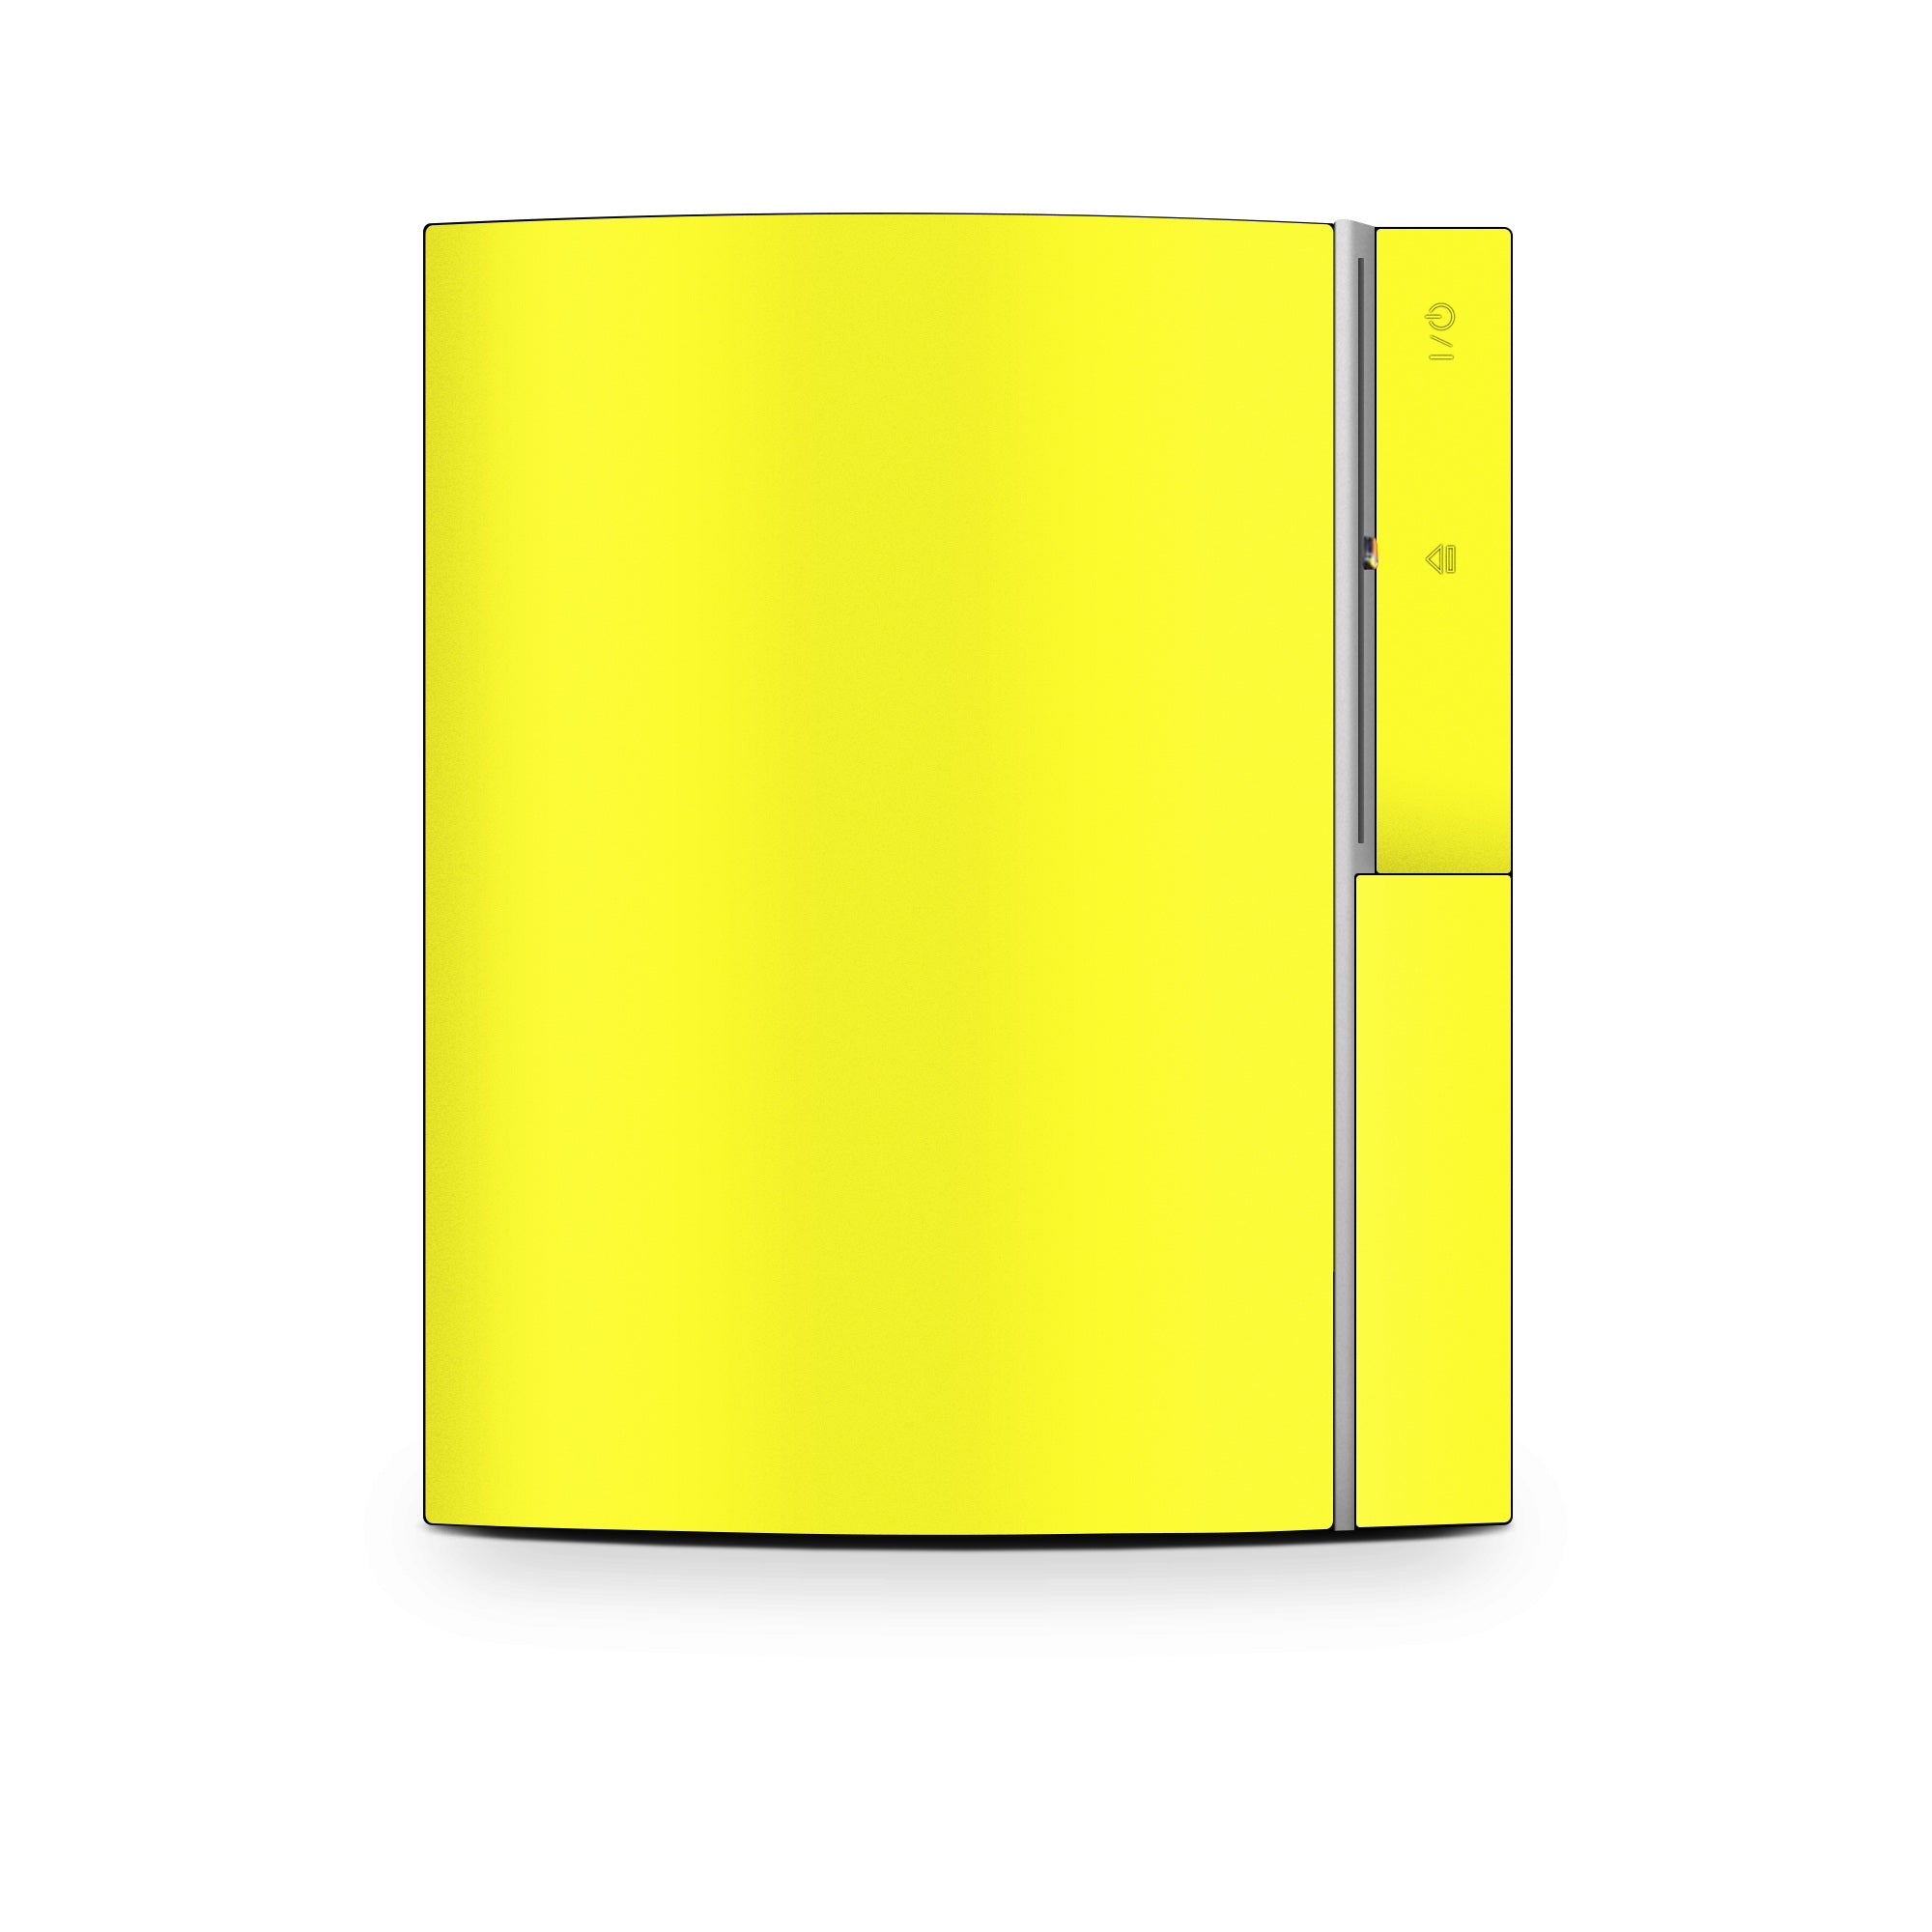 Solid State Lemon - Sony PS3 Skin